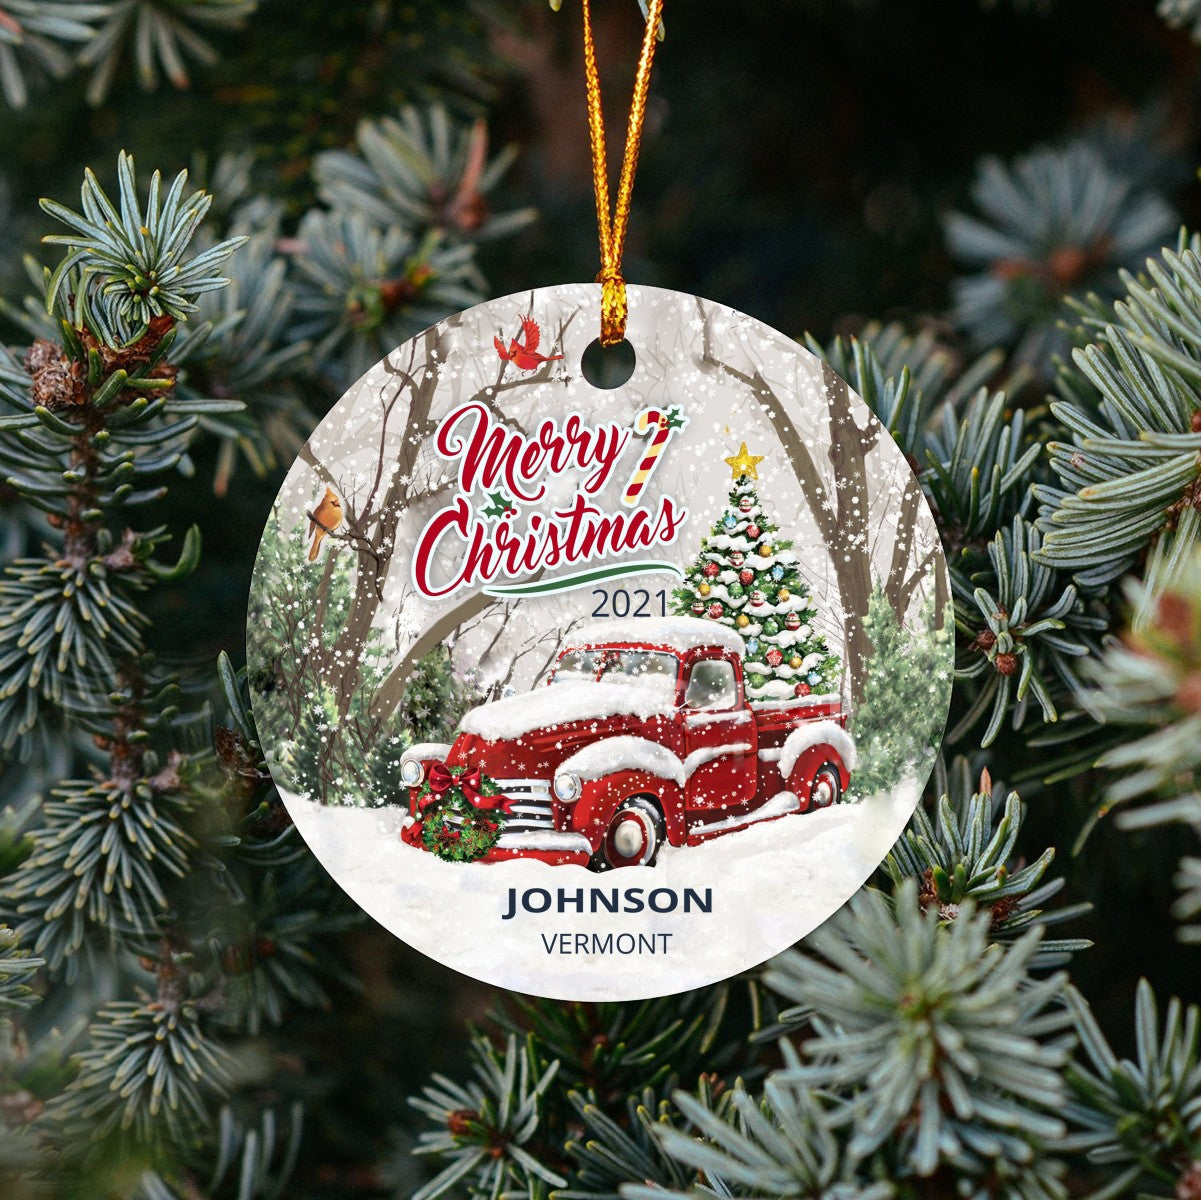 Christmas Tree Ornaments Johnson - Ornament With Name City, State Johnson Vermont VT Ornament - Red Truck Xmas Ornaments 3'' Plastic Gift For Family, Friend And Housewarming